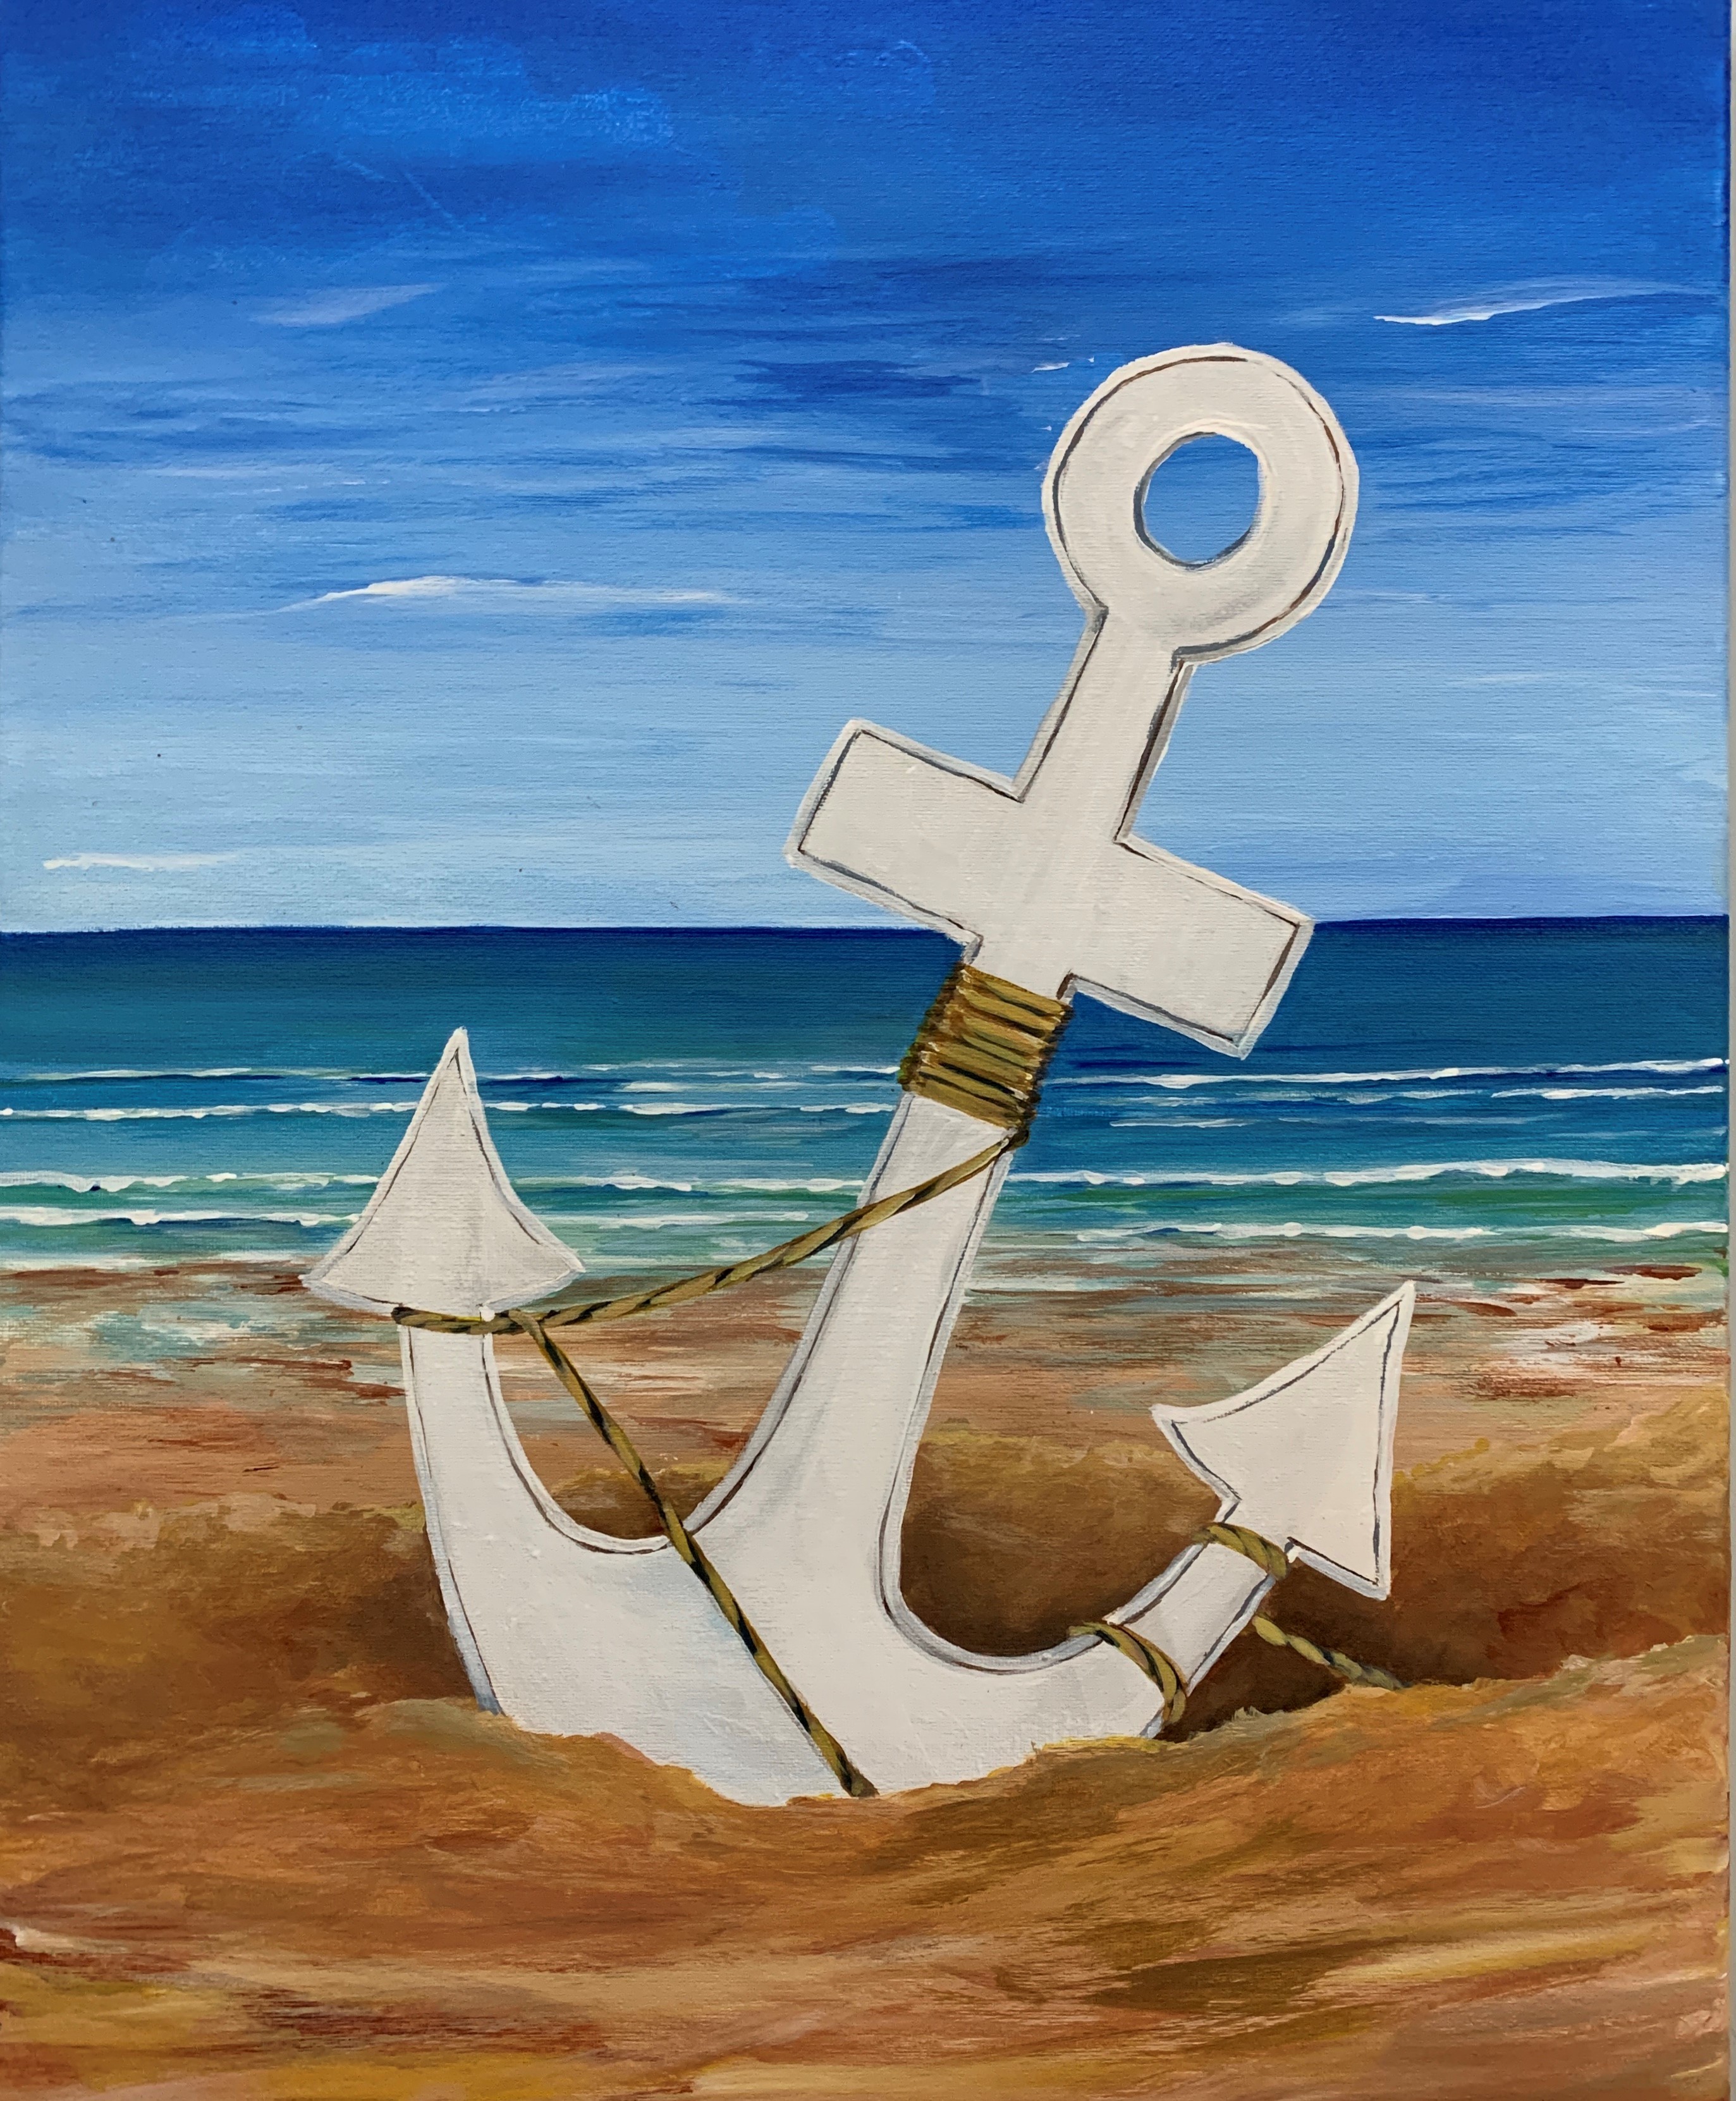 A Anchored in the Sand experience project by Yaymaker